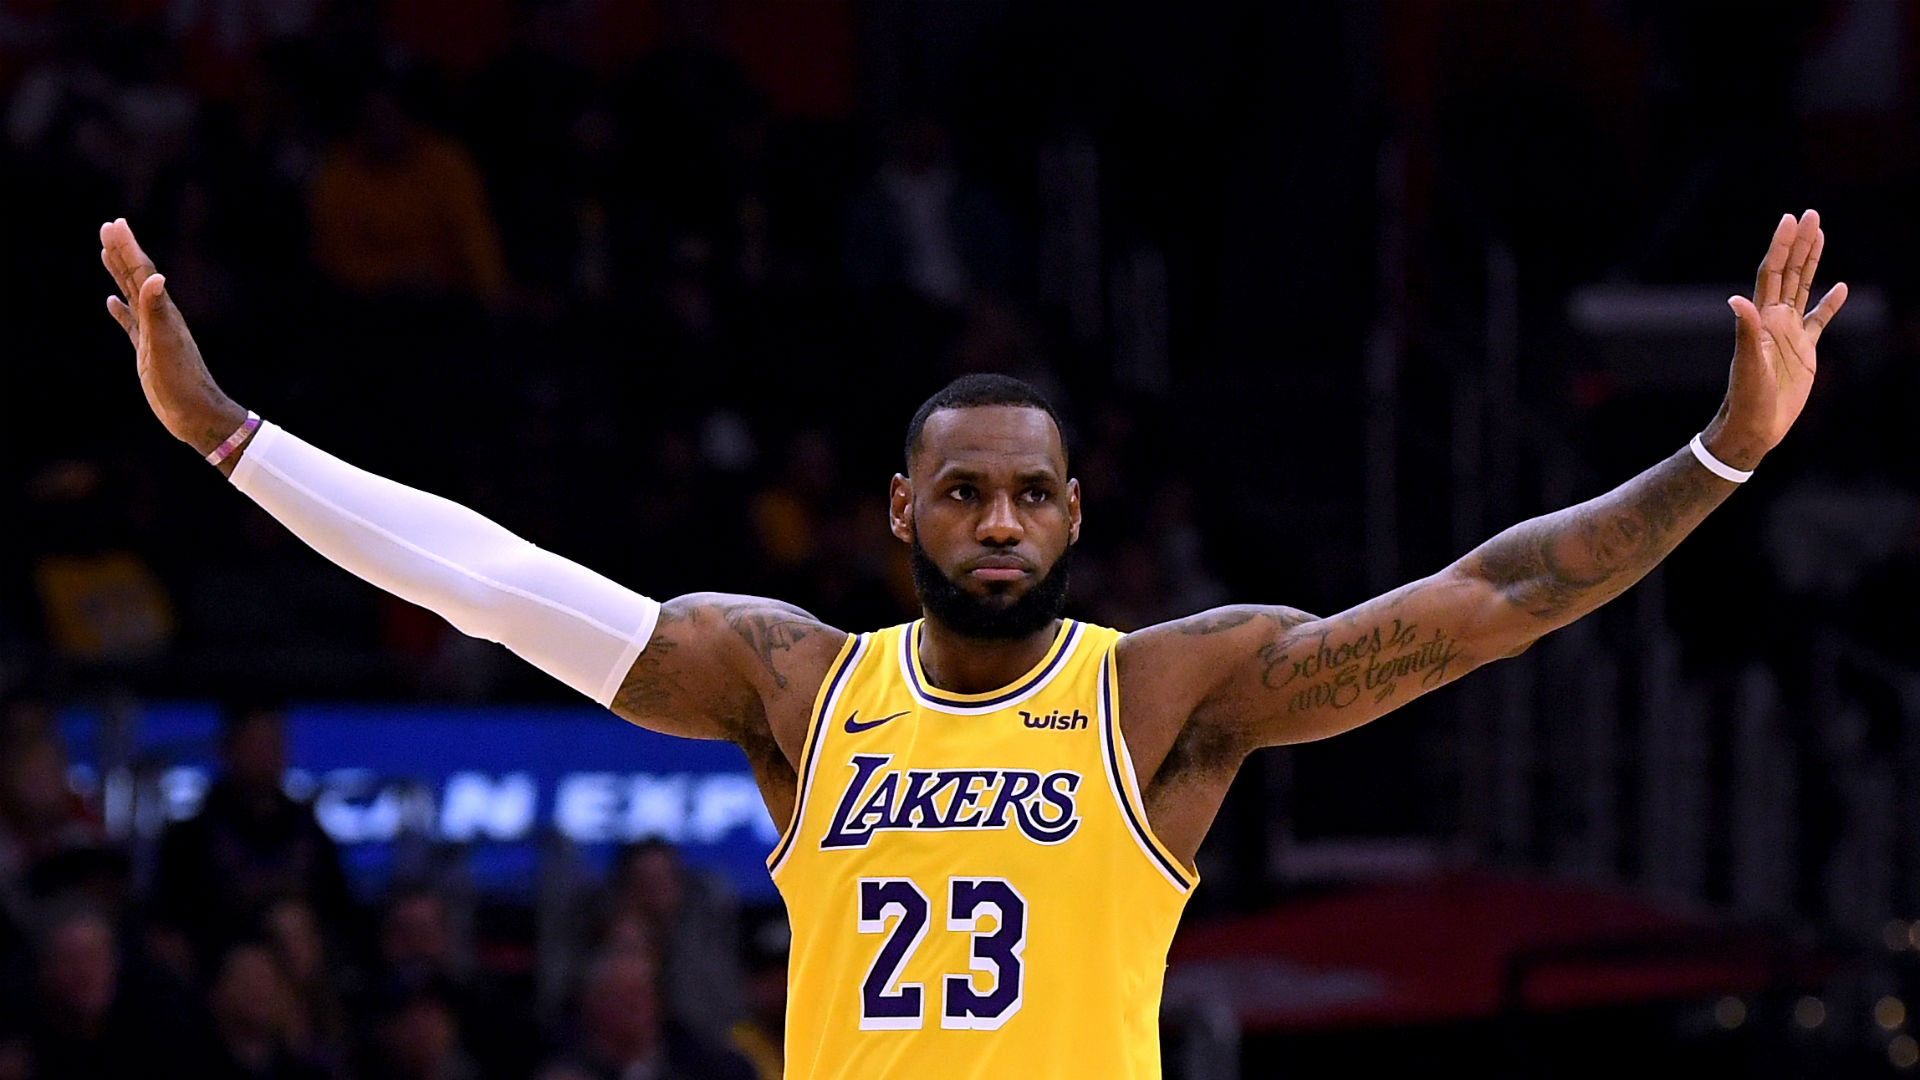 LeBron James topped Forbes' list — which factors in salaries, endorsements, appearances, royalties and media pacts — again.